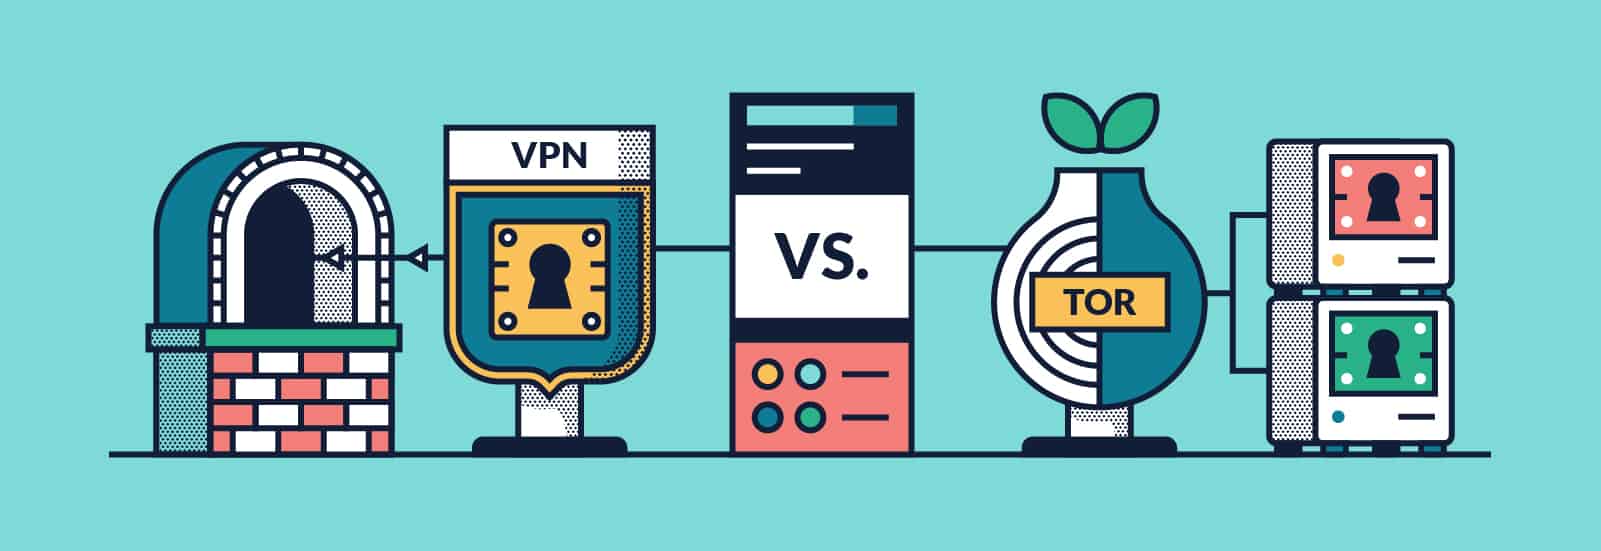 what is a tor vpn